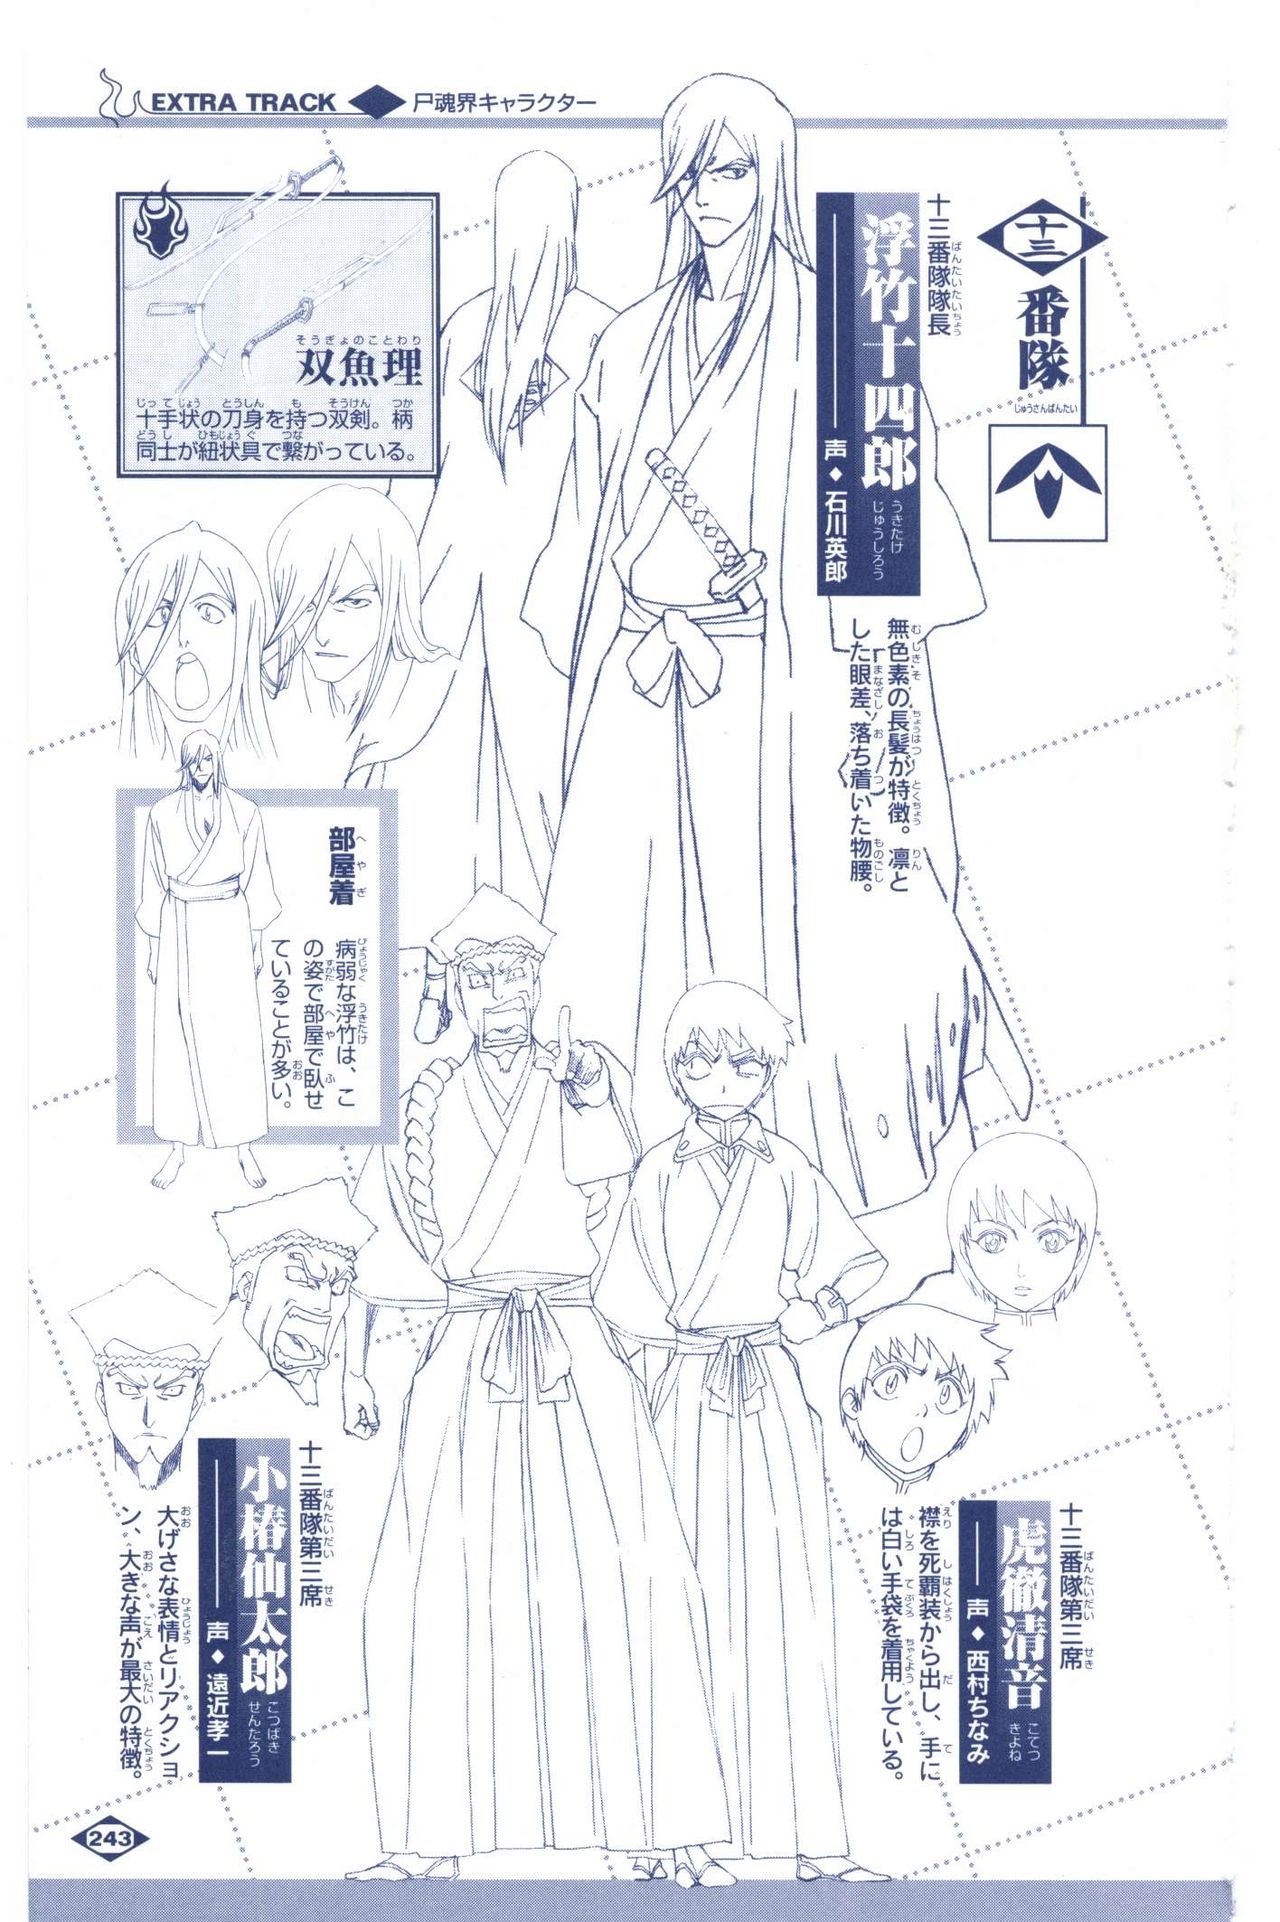 Bleach: Official Animation Book VIBEs 243